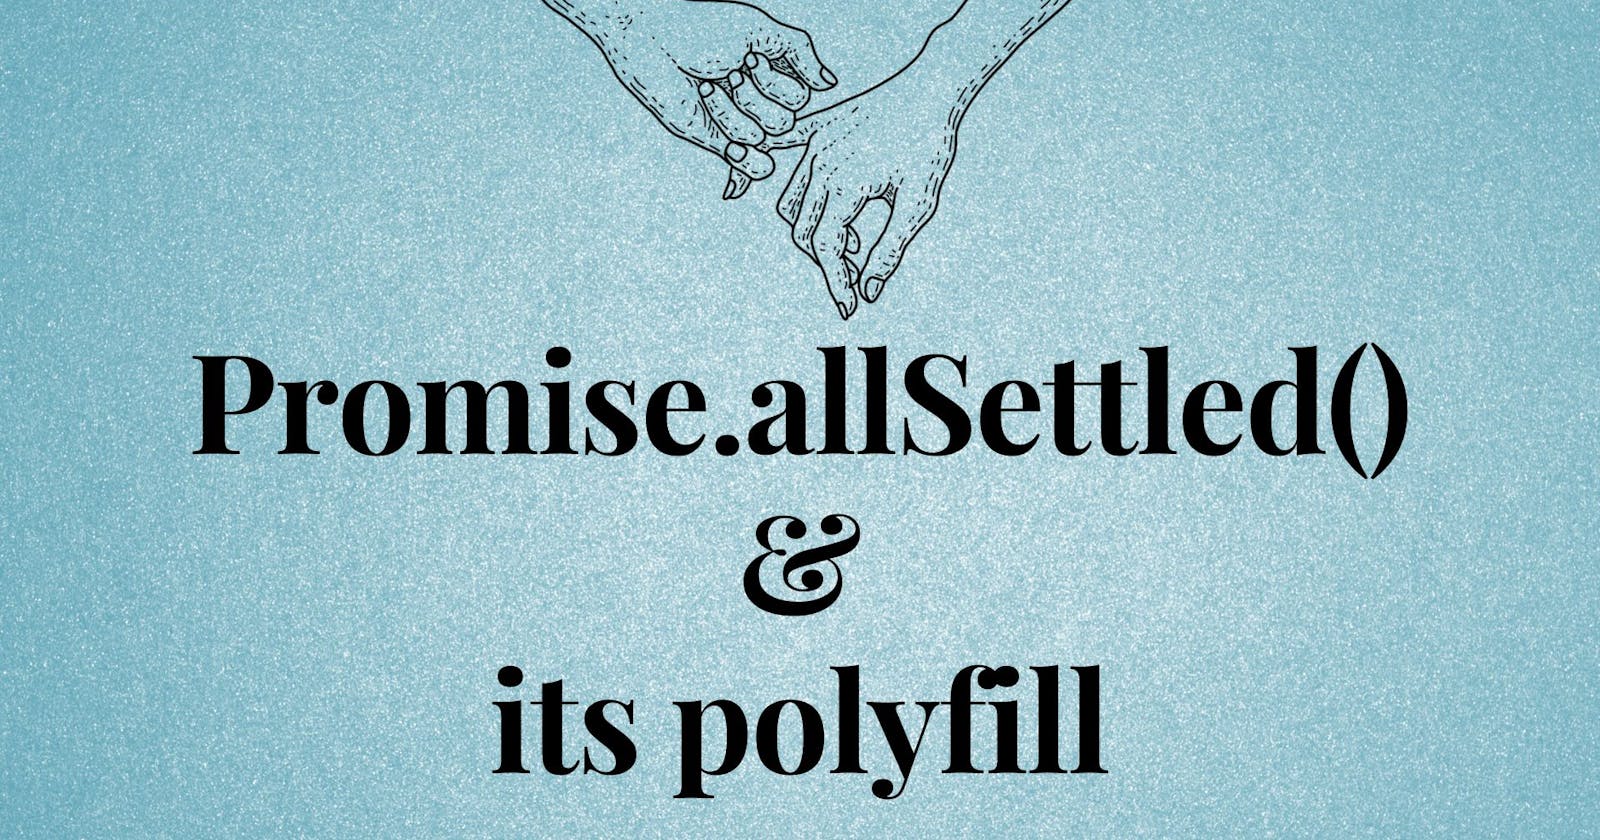 Promise.allSettled() and its polyfill